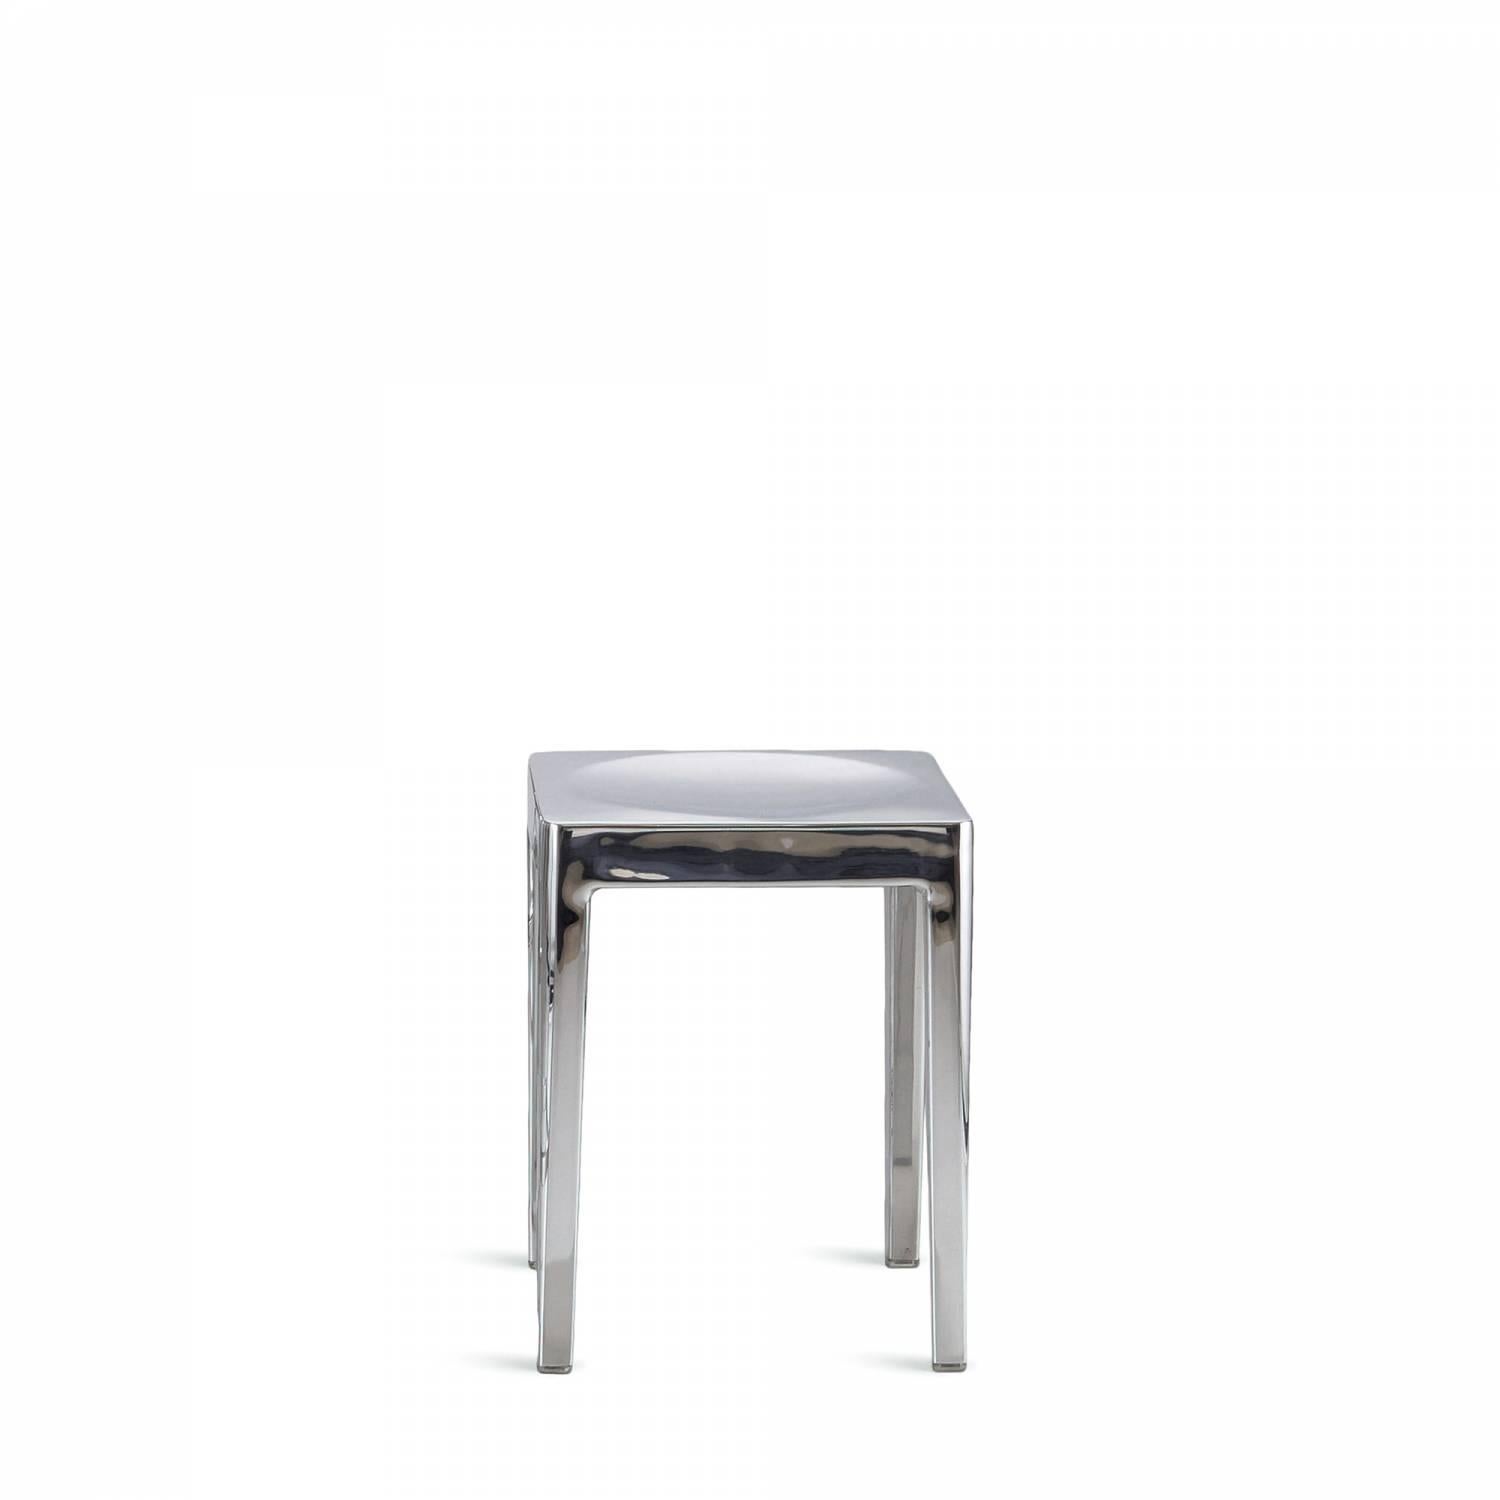 The Museum of Modern Art asked Philippe Starck and Emeco to make a simple stool for the “Mies Van der Rohe in Berlin” retrospective. The result is one of our best selling stools, a circle in a square – at once practical and sophisticated.

Made